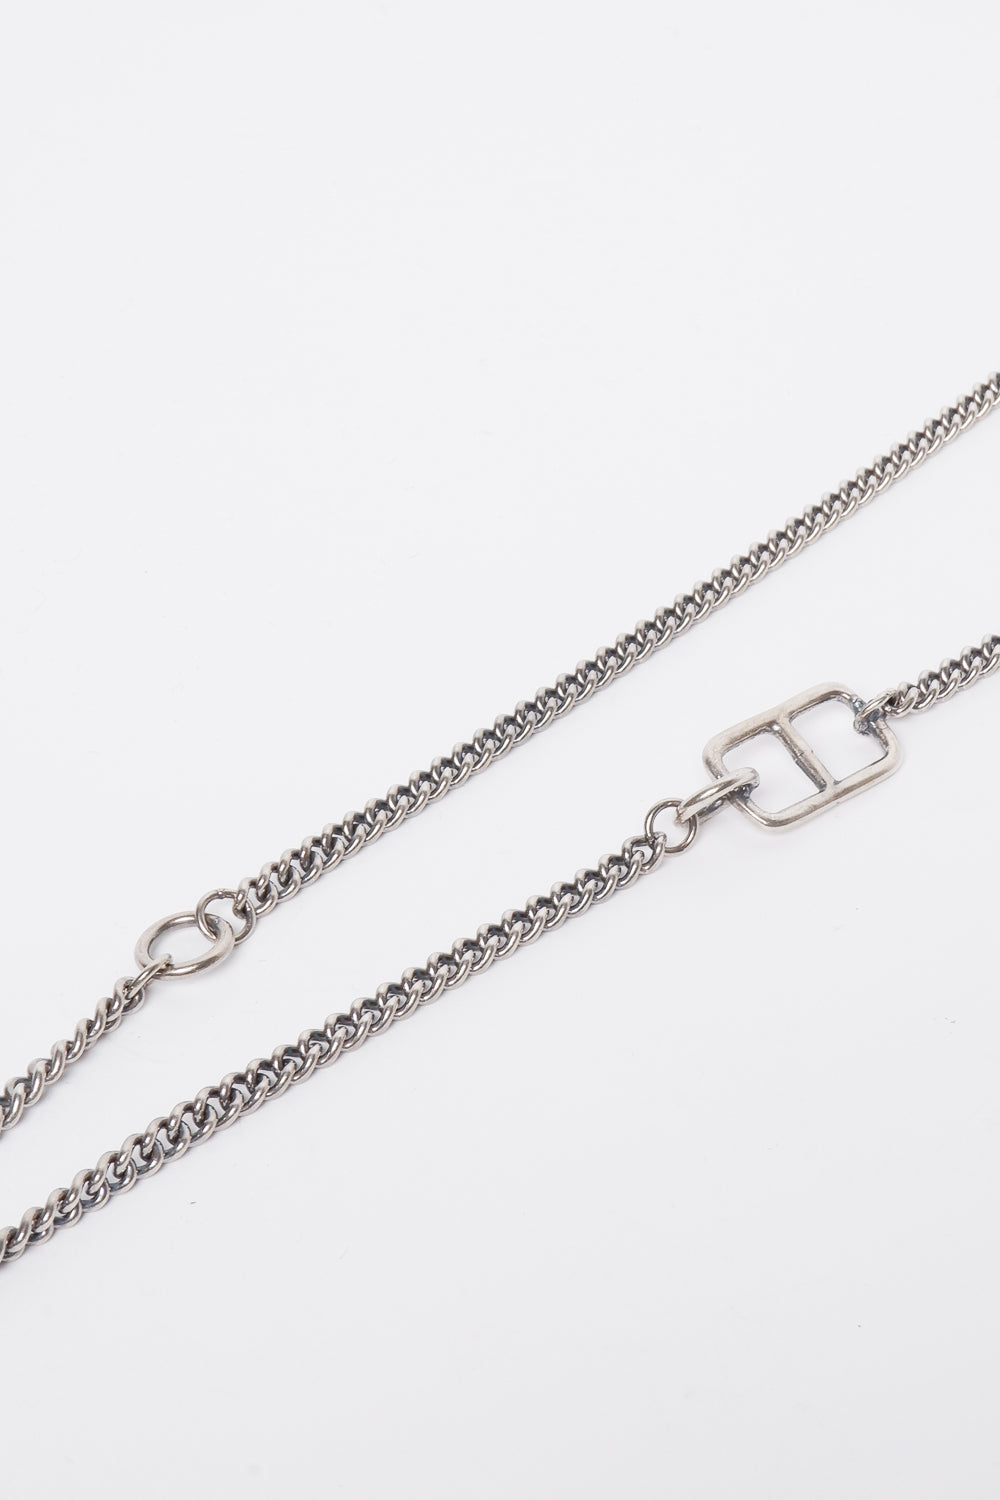 Buy the GOTI CN2126 Necklace at Intro. Spend £50 for free UK delivery. Official stockists. We ship worldwide.